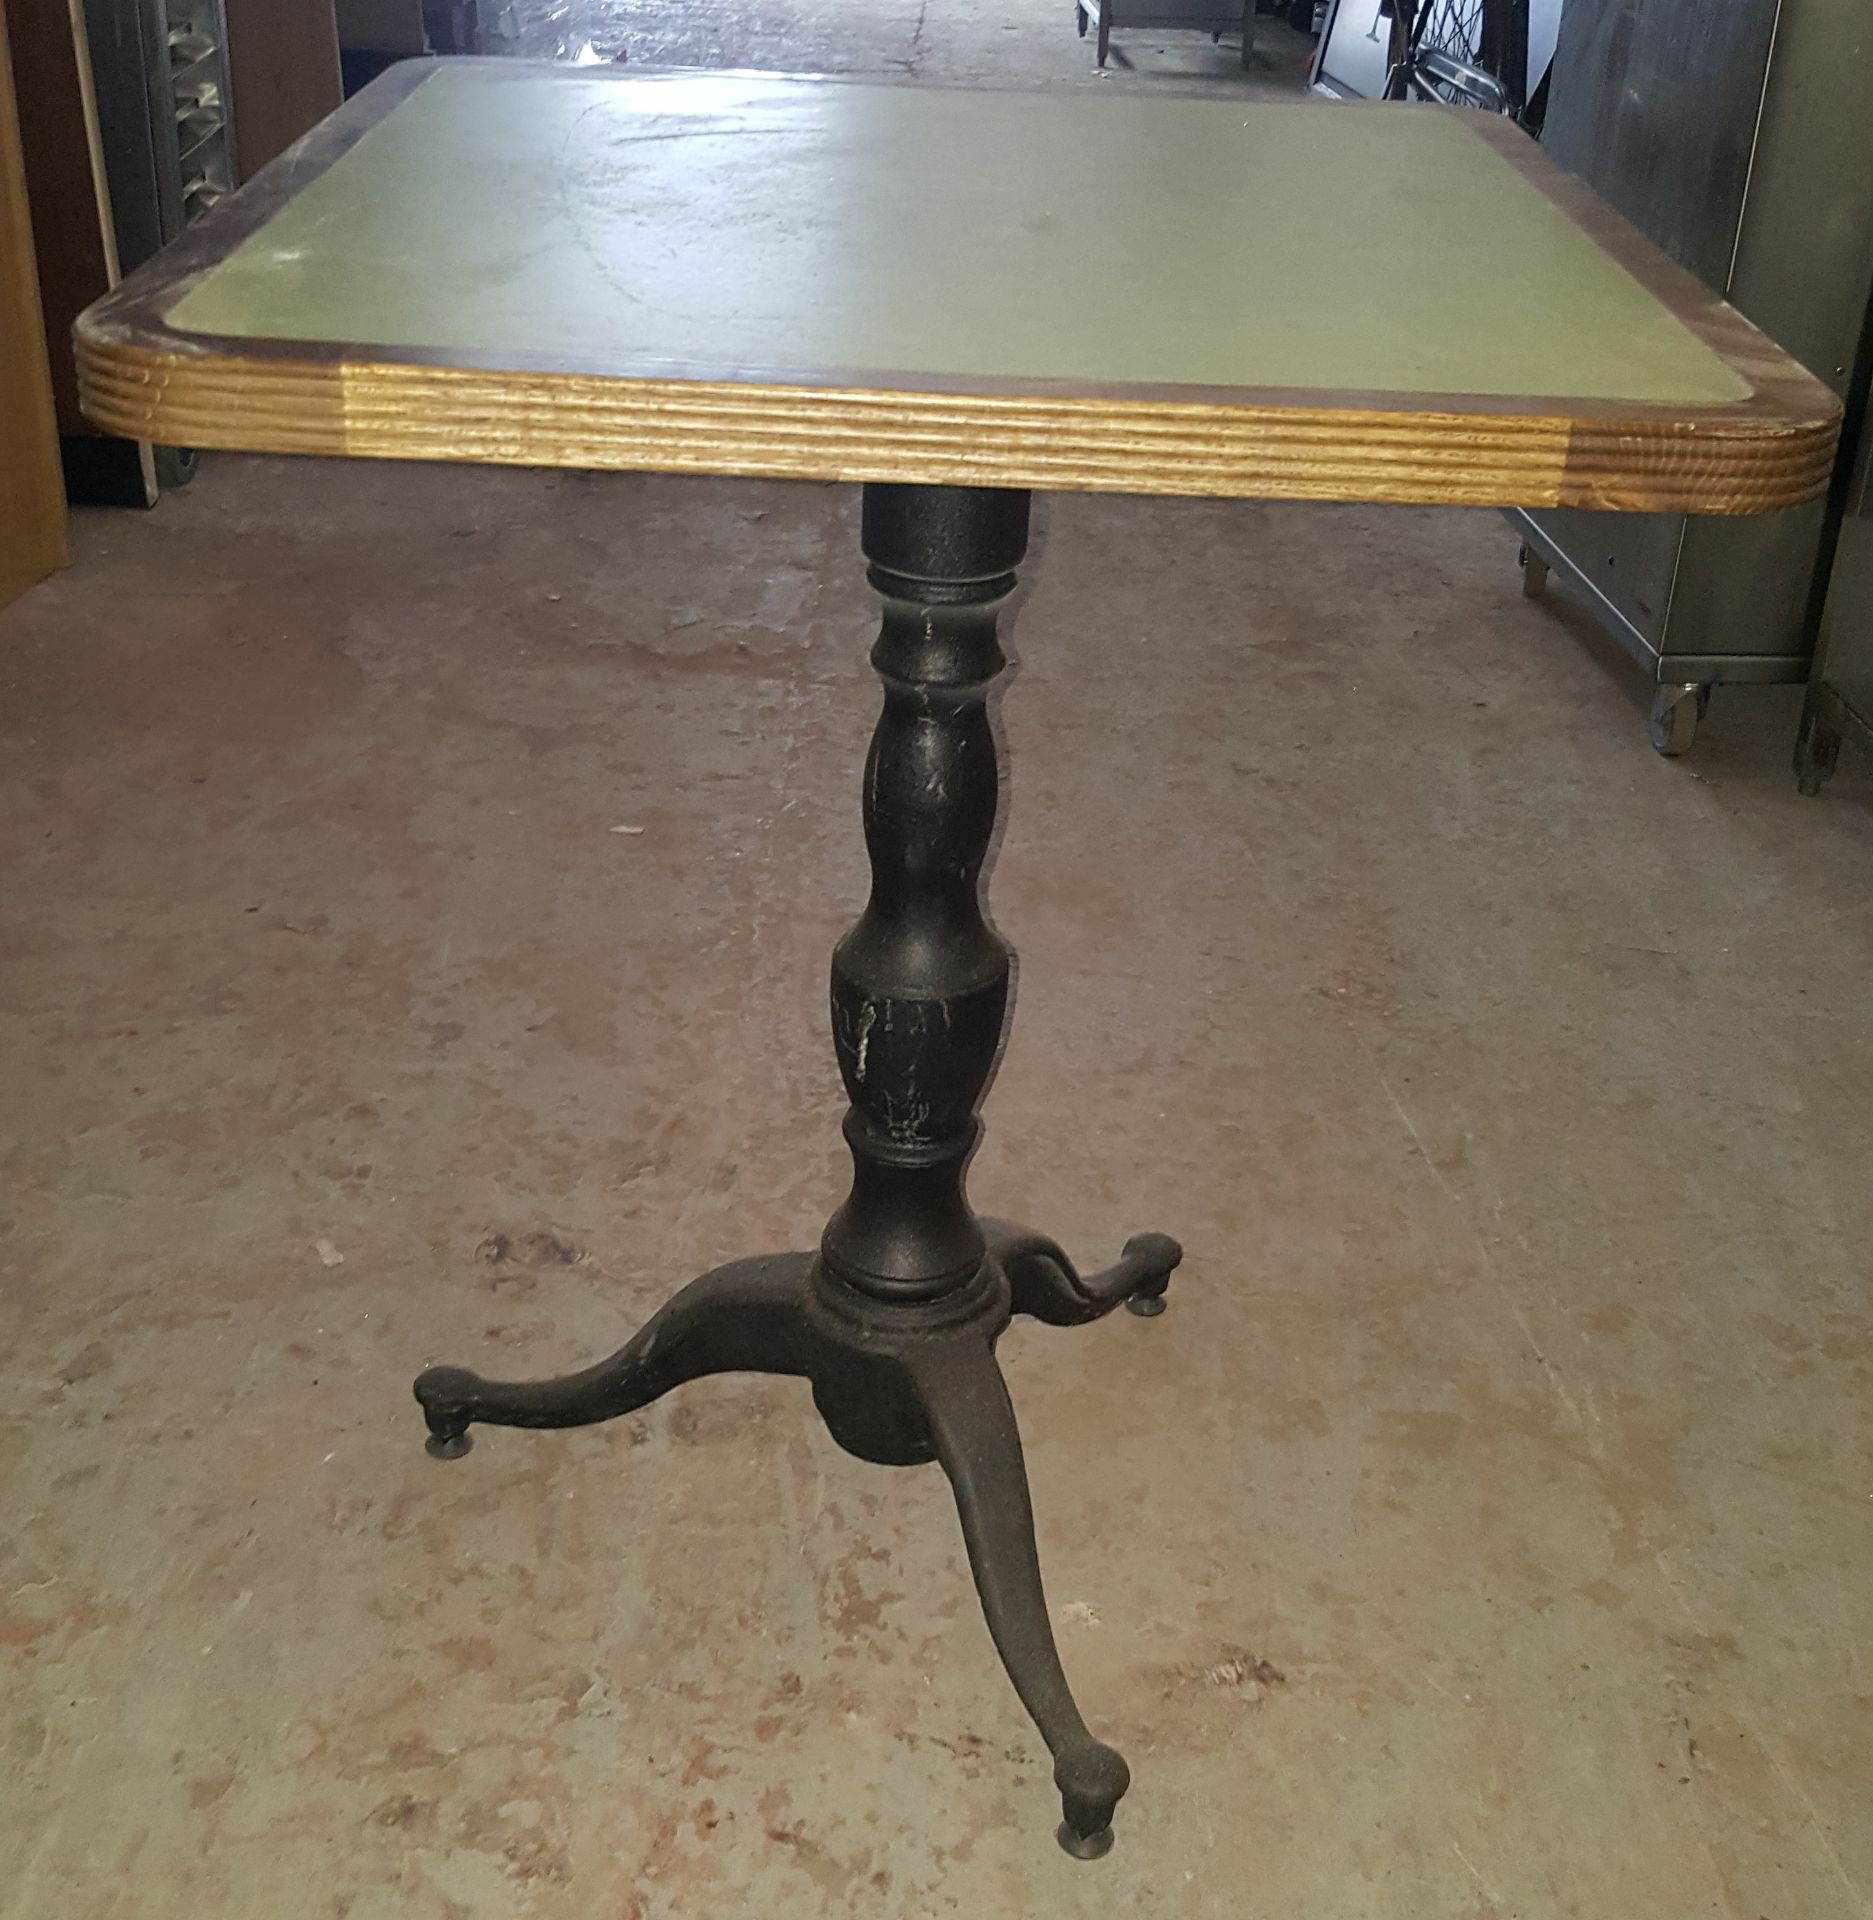 3 x Assorted Bistro Restaurant Tables With Green Faux Leather Inserts And Three-Legged Base - Image 7 of 9